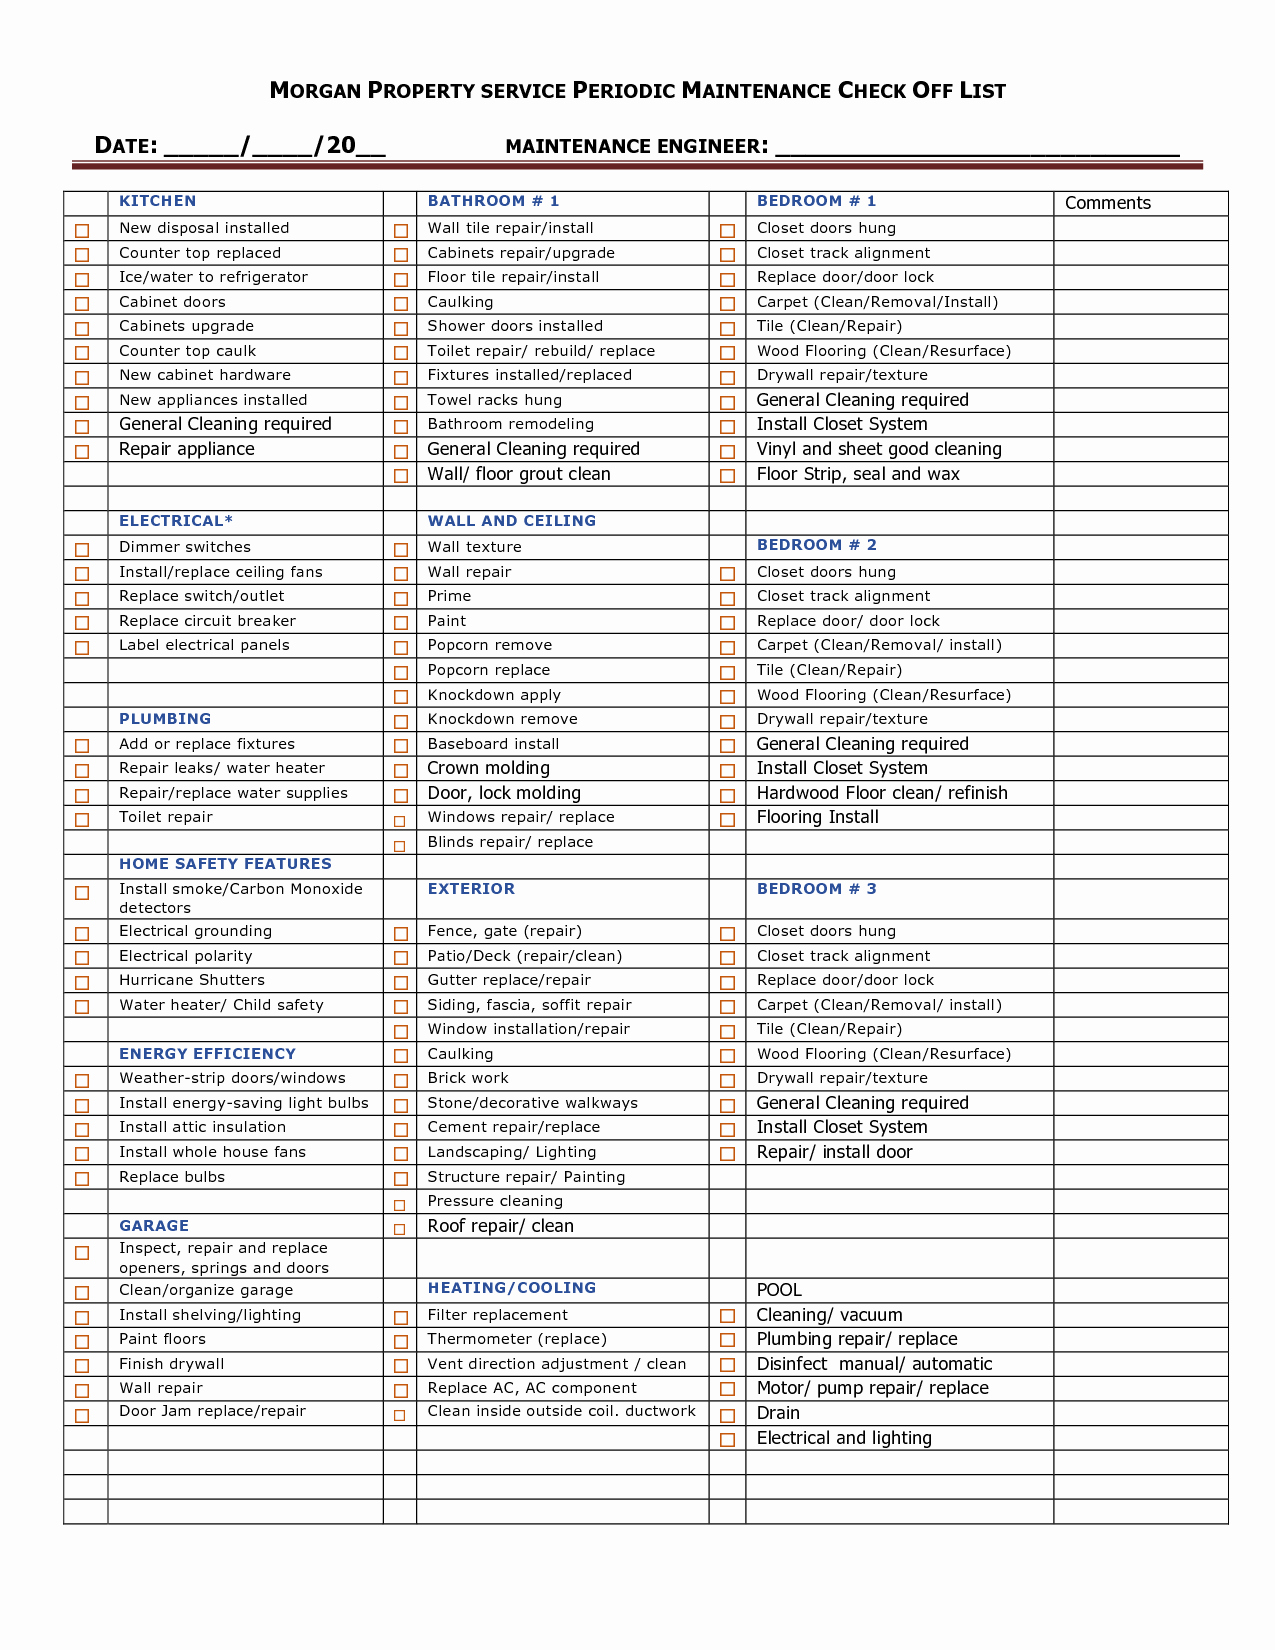 Home Inspection Checklist Template Luxury Printable Home Inspection Checklist